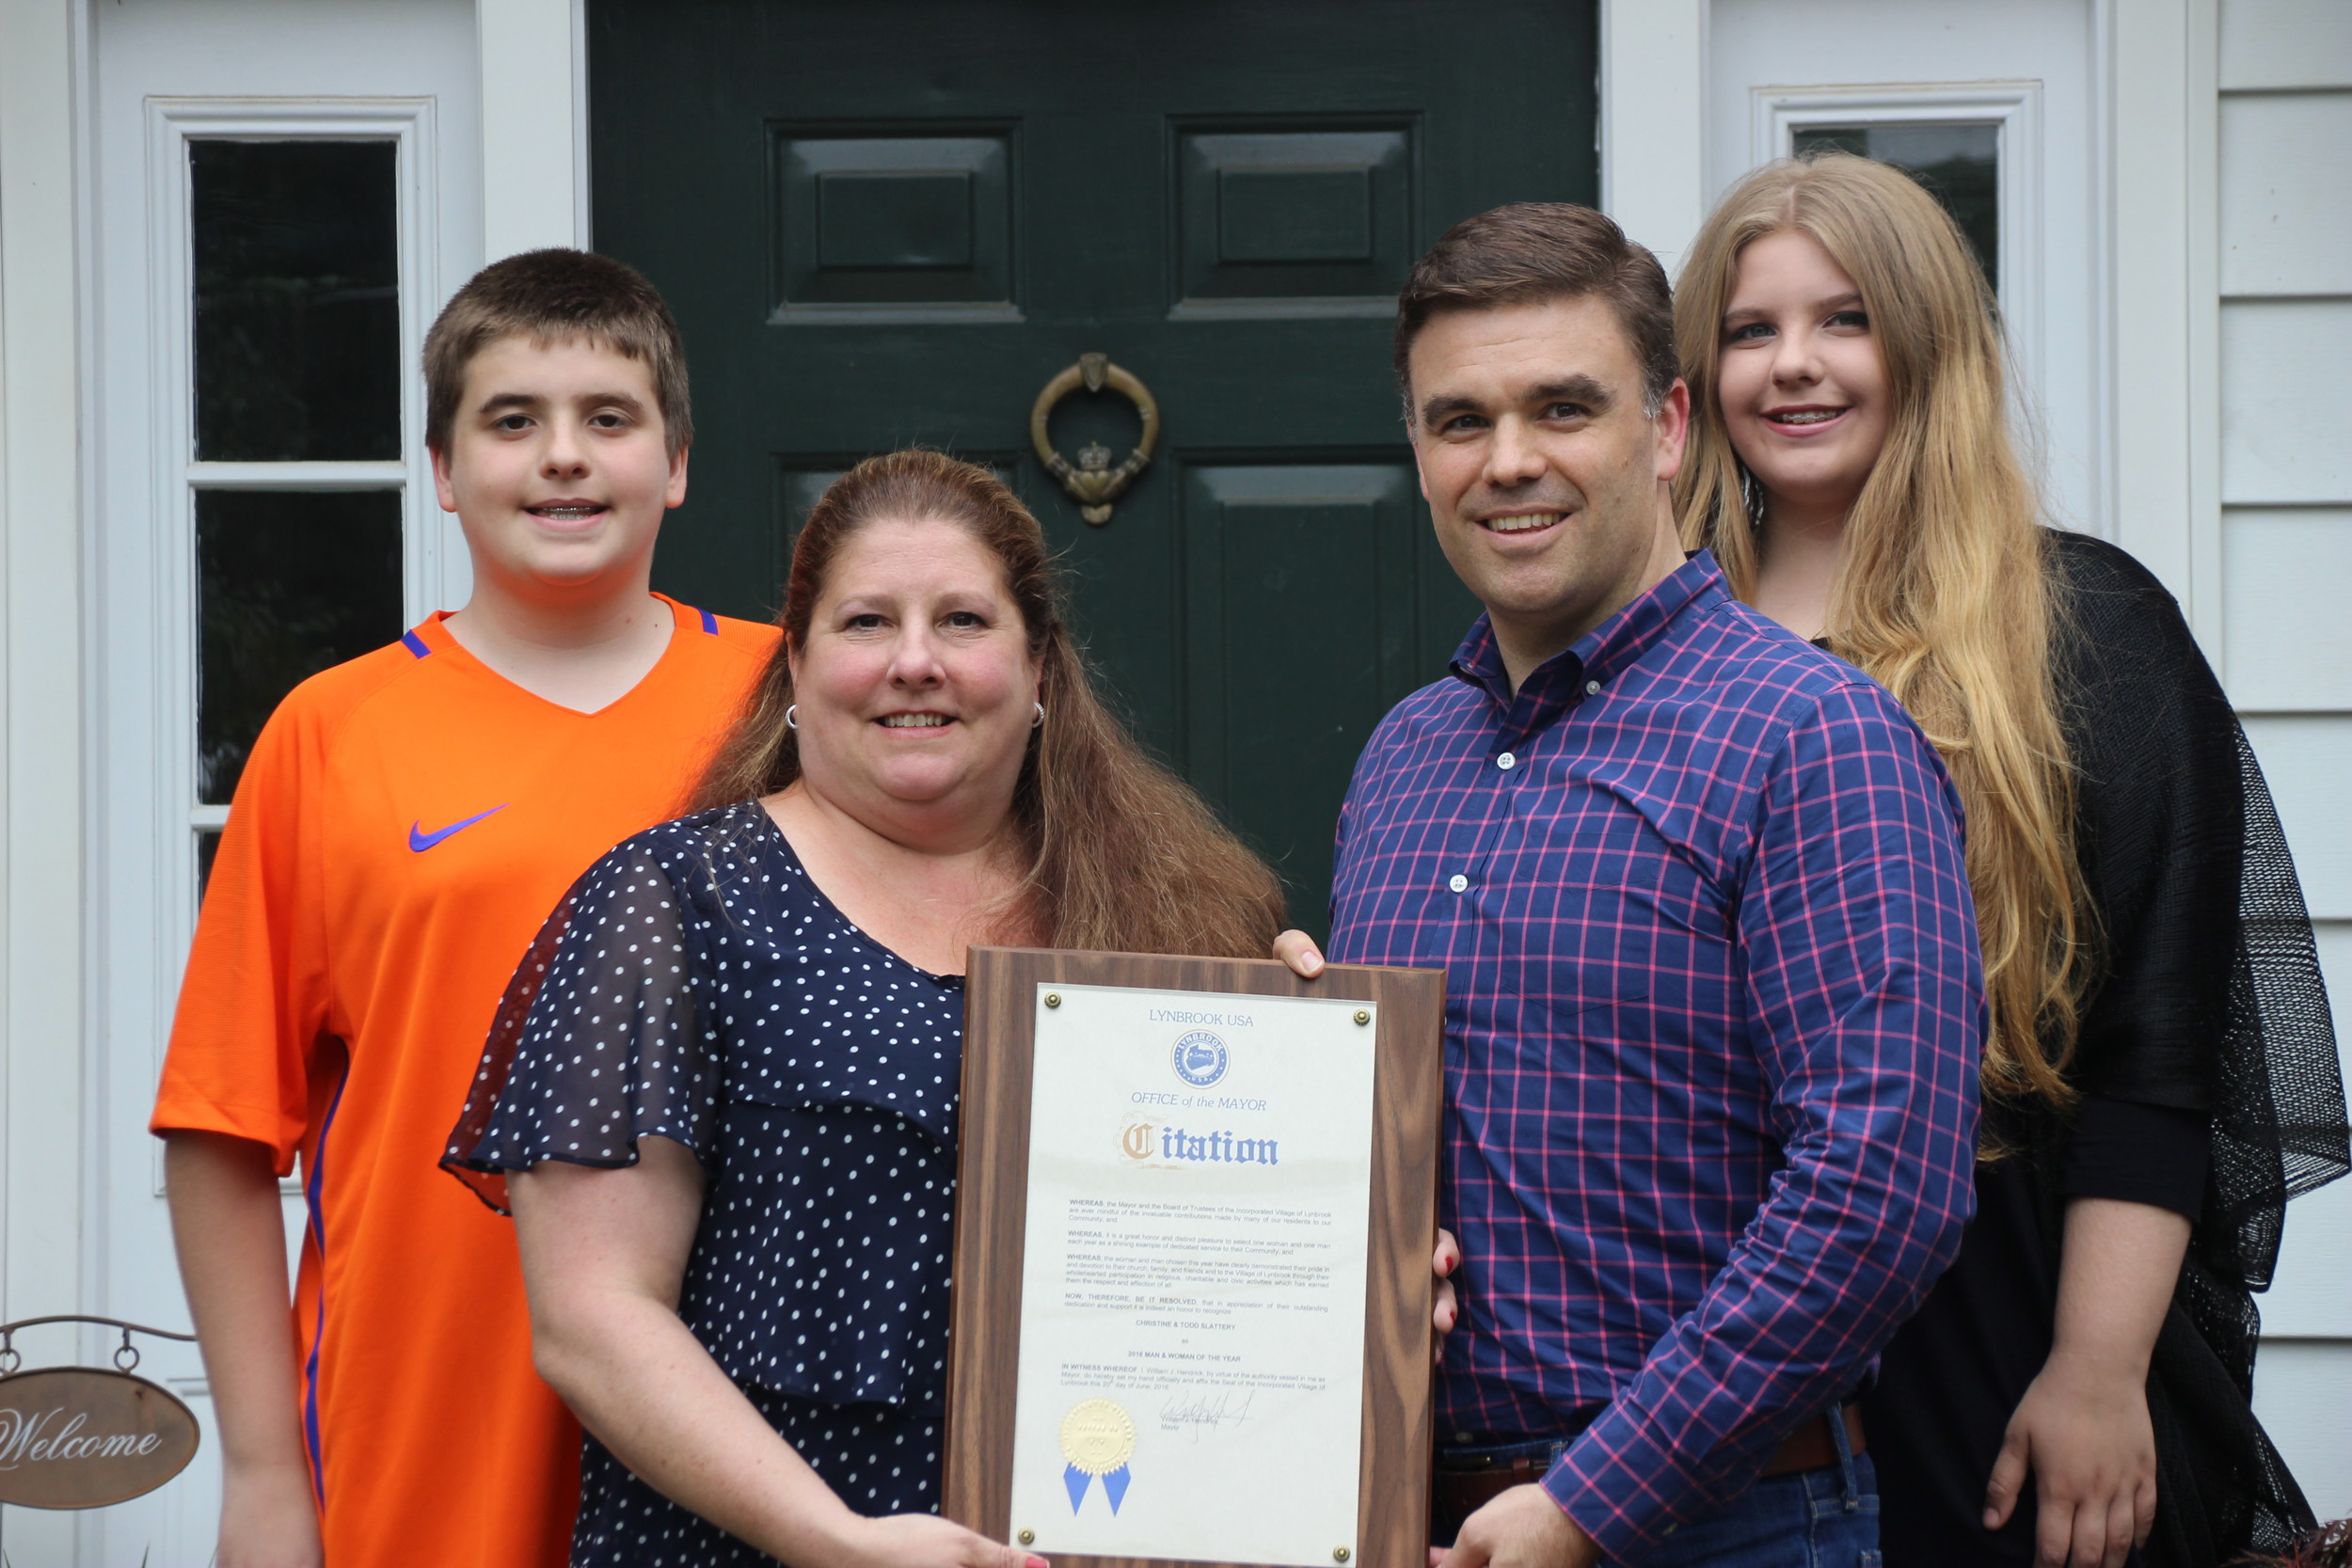 Mayor Bill Hendrick presented Todd and Christine Slattery with a citation declaring them as the 2016 Lynbrook Man and Woman of the Year on June 20.